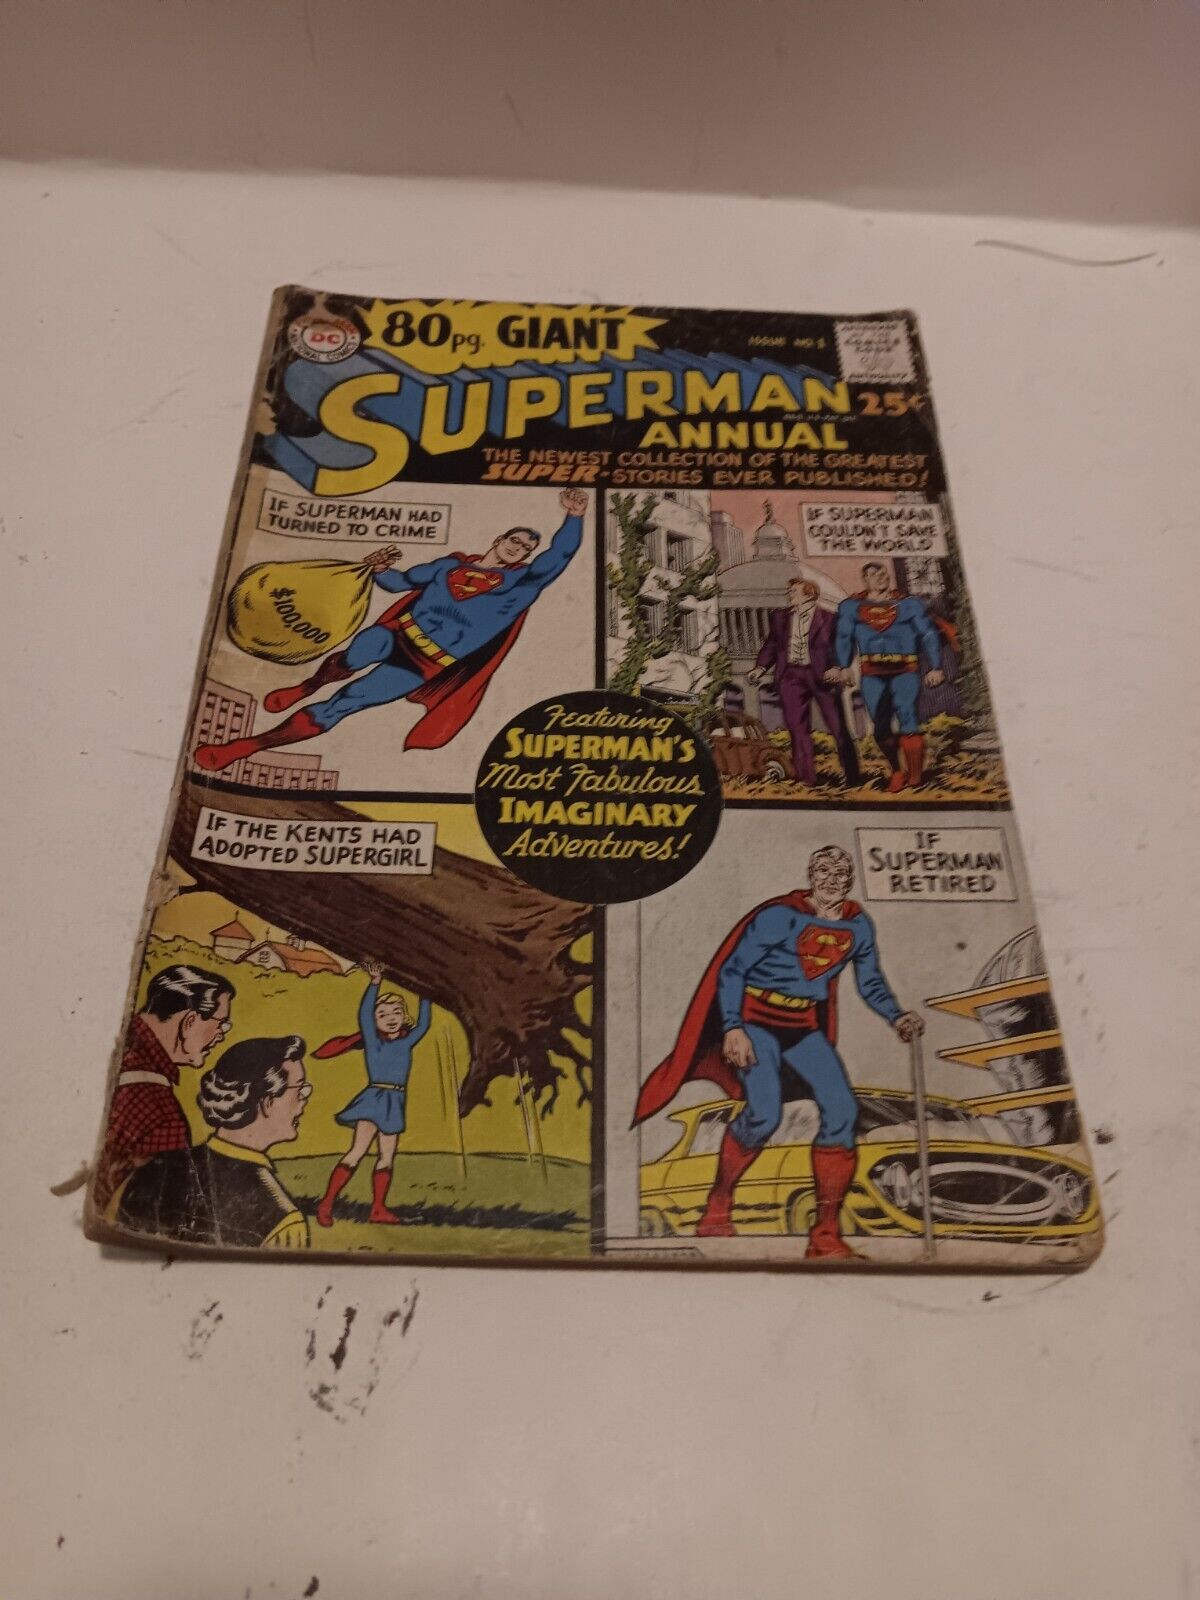 SUPERMAN ANNUAL 80 page Giant #1 (1964) DC Comics. Combined Shipping